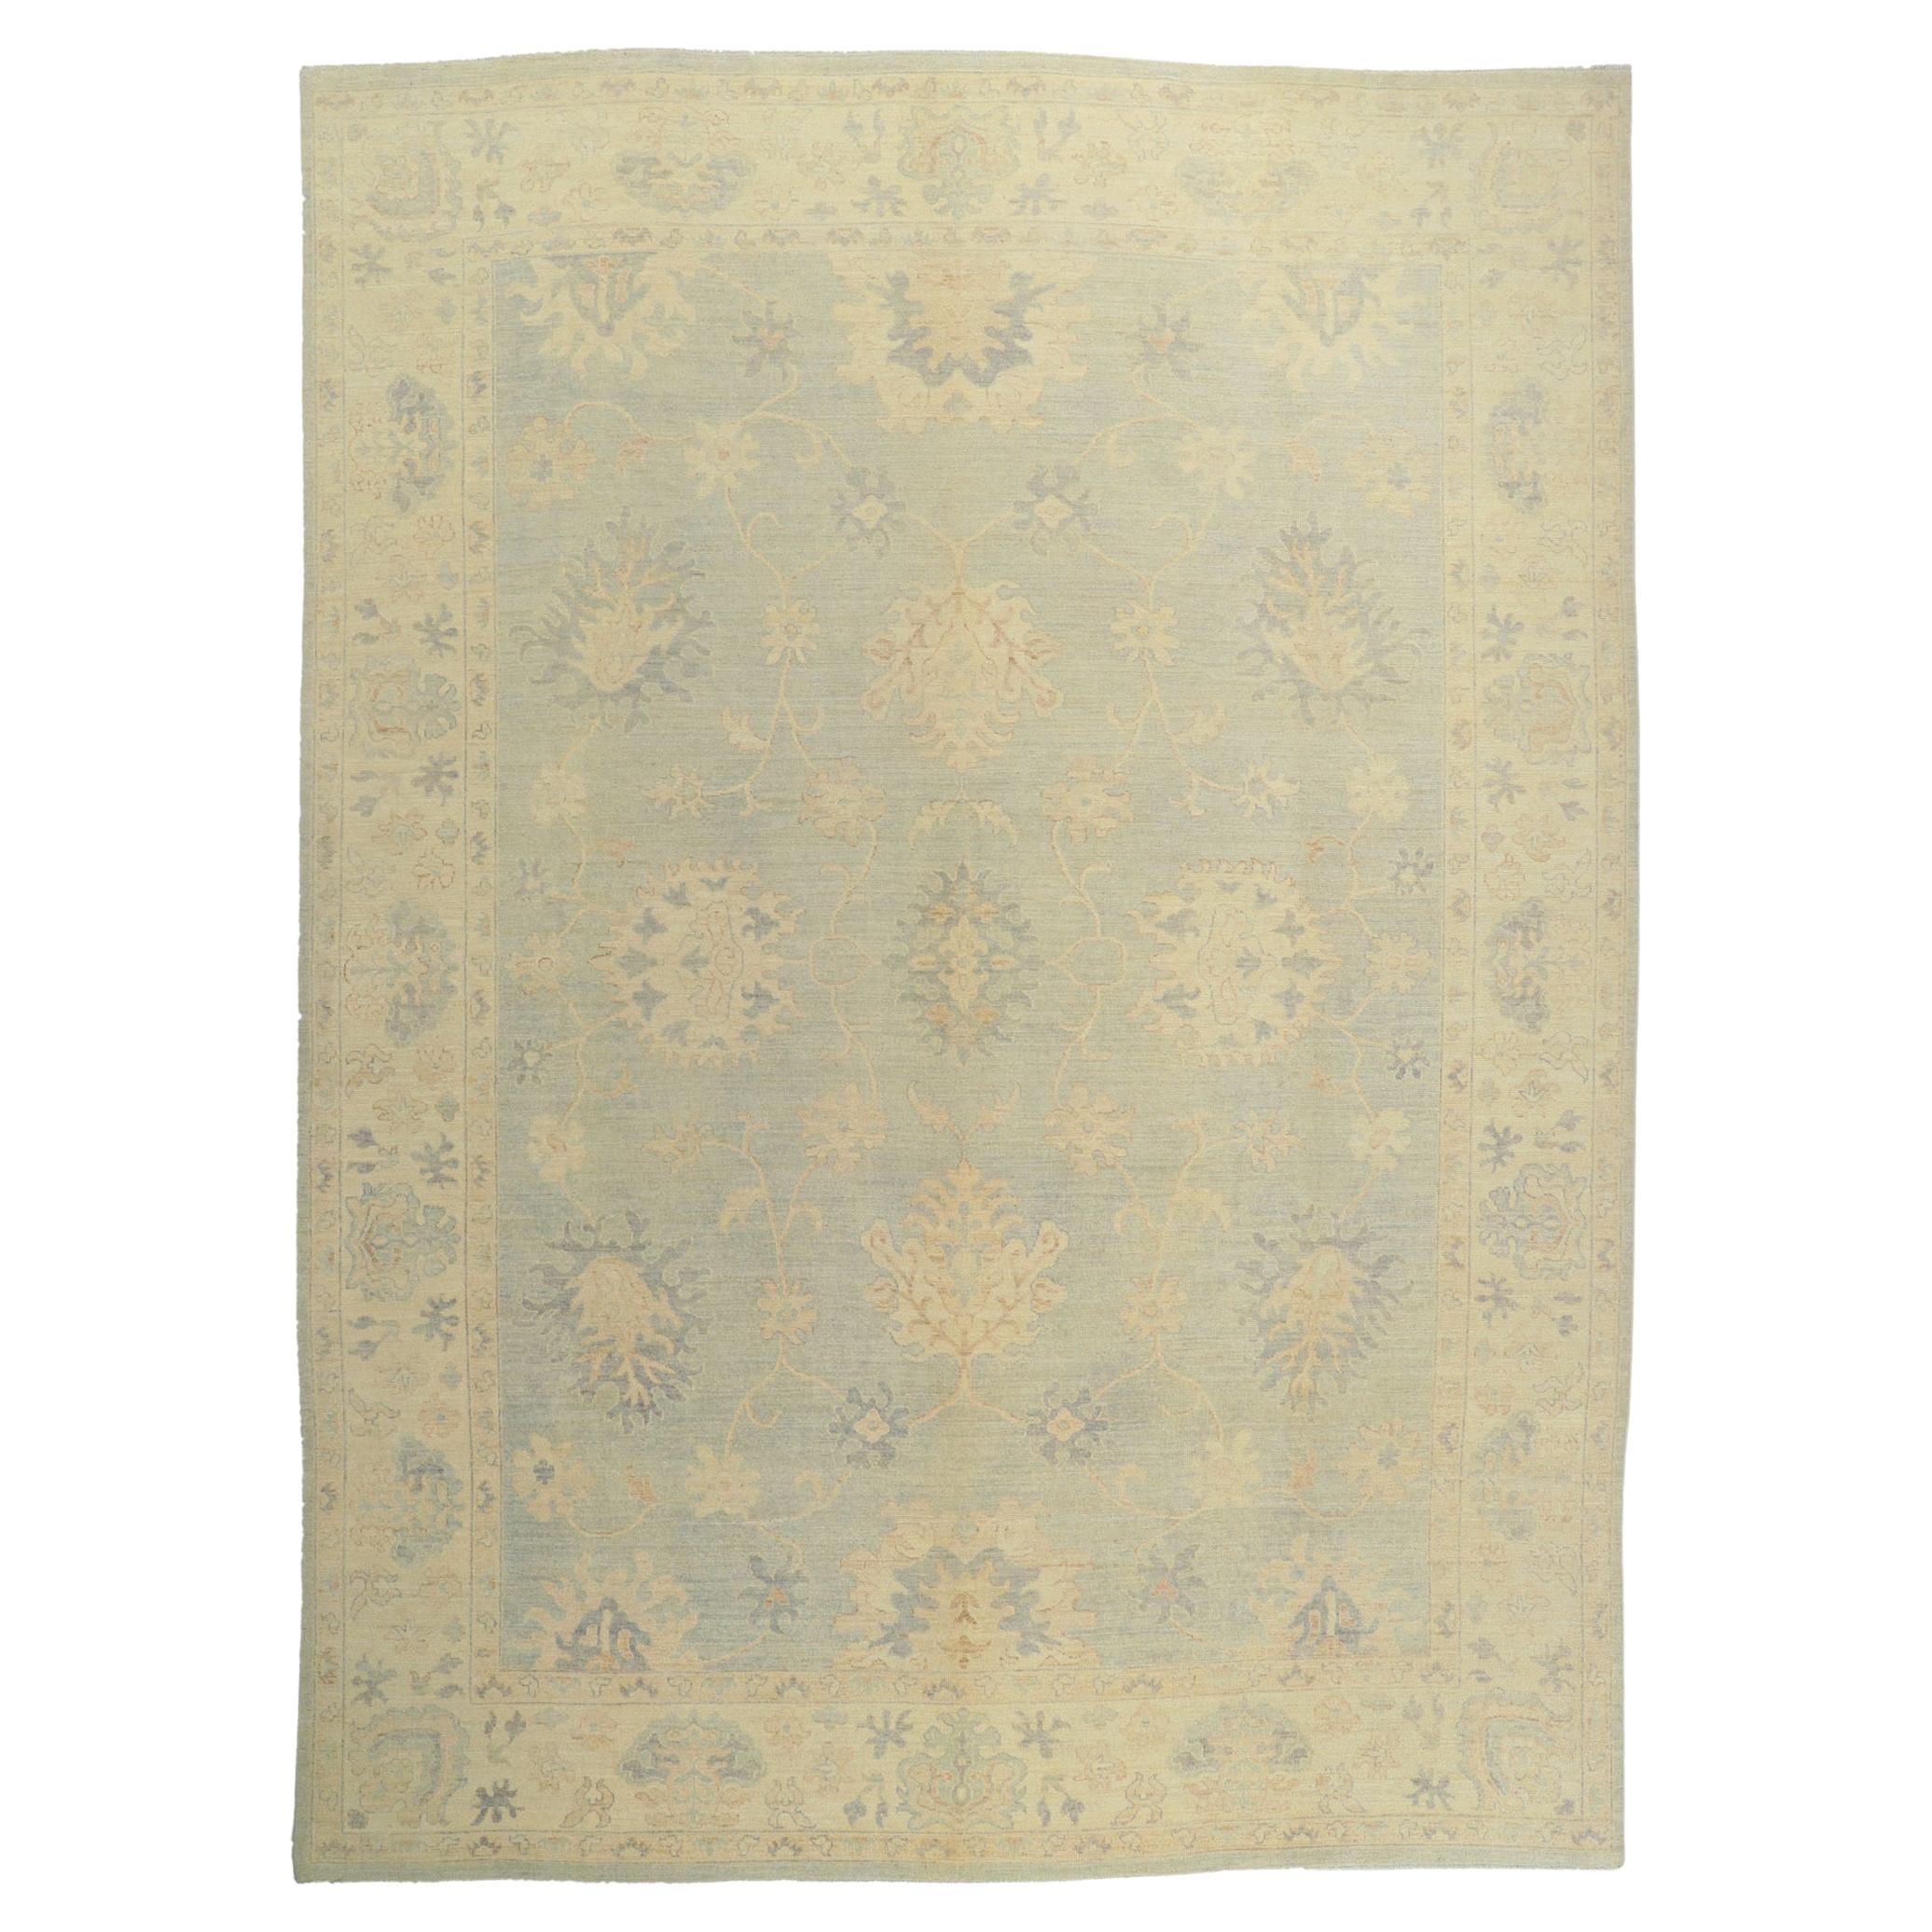 New Vintage-Inspired Oushak Rug with Light and Airy Color Palette For Sale